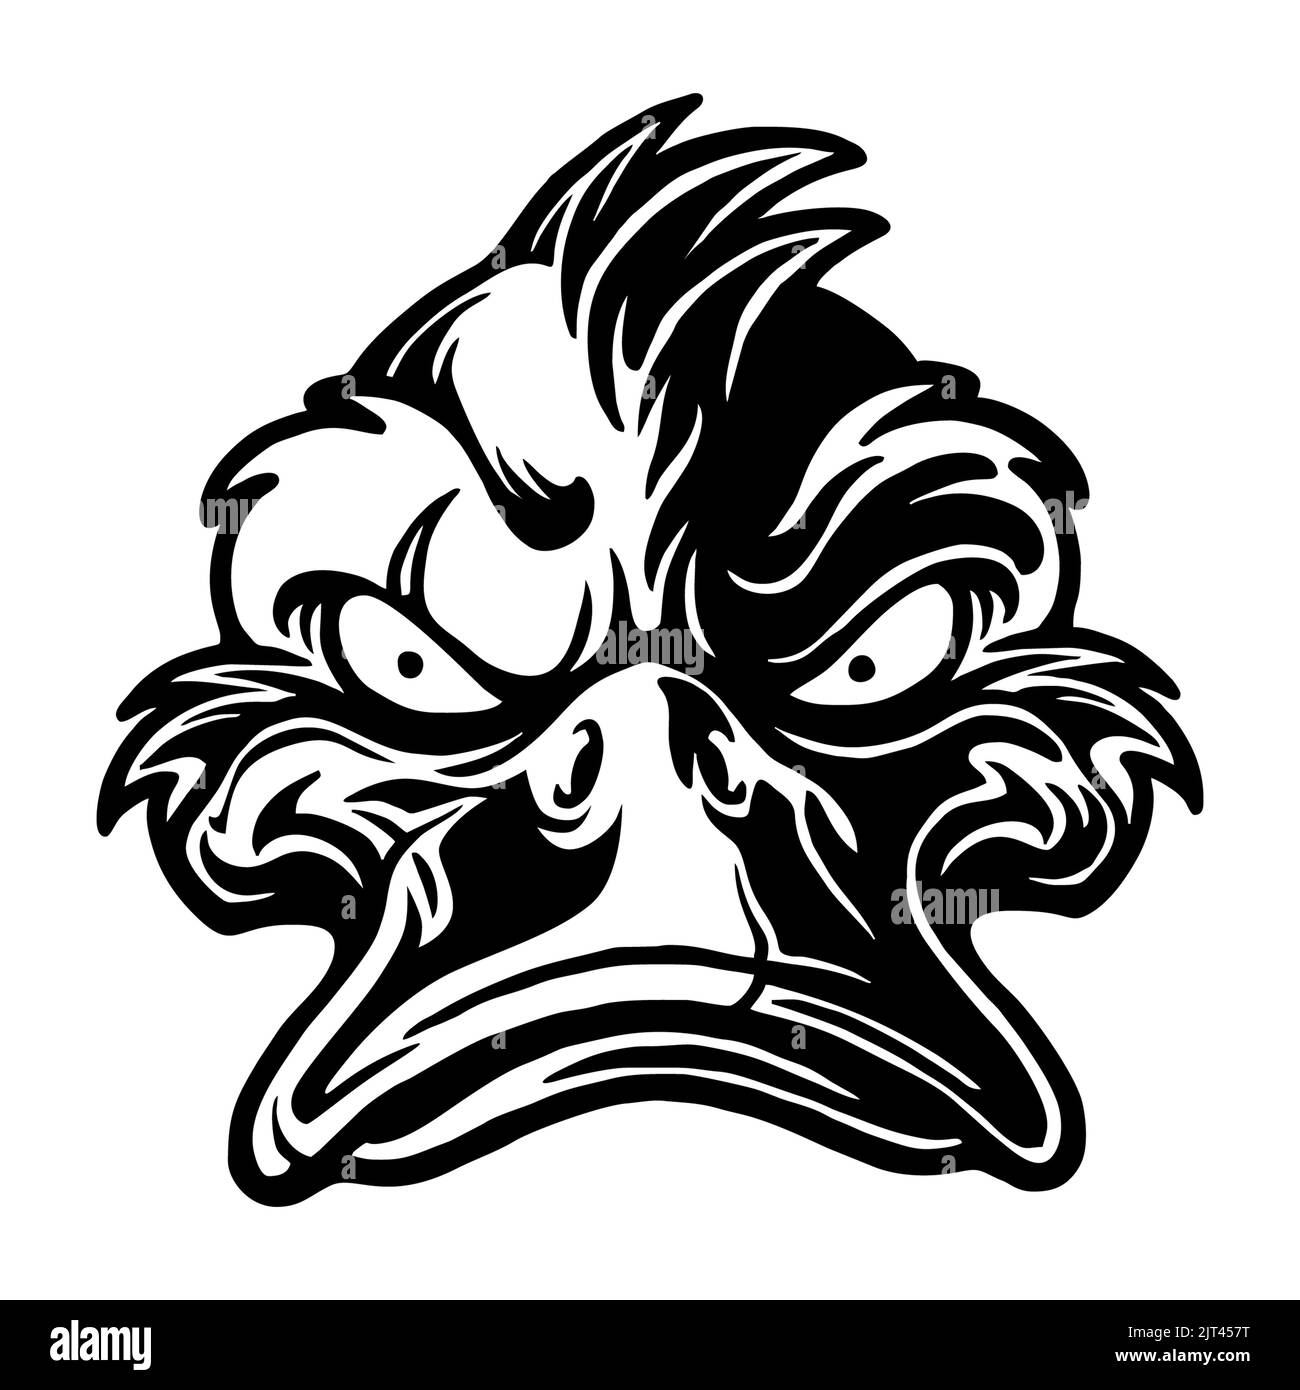 Bad Duck Clipart Black and White Mascot Vector illustrations for your work Logo, mascot merchandise t-shirt, stickers and Label designs, poster, greet Stock Photo